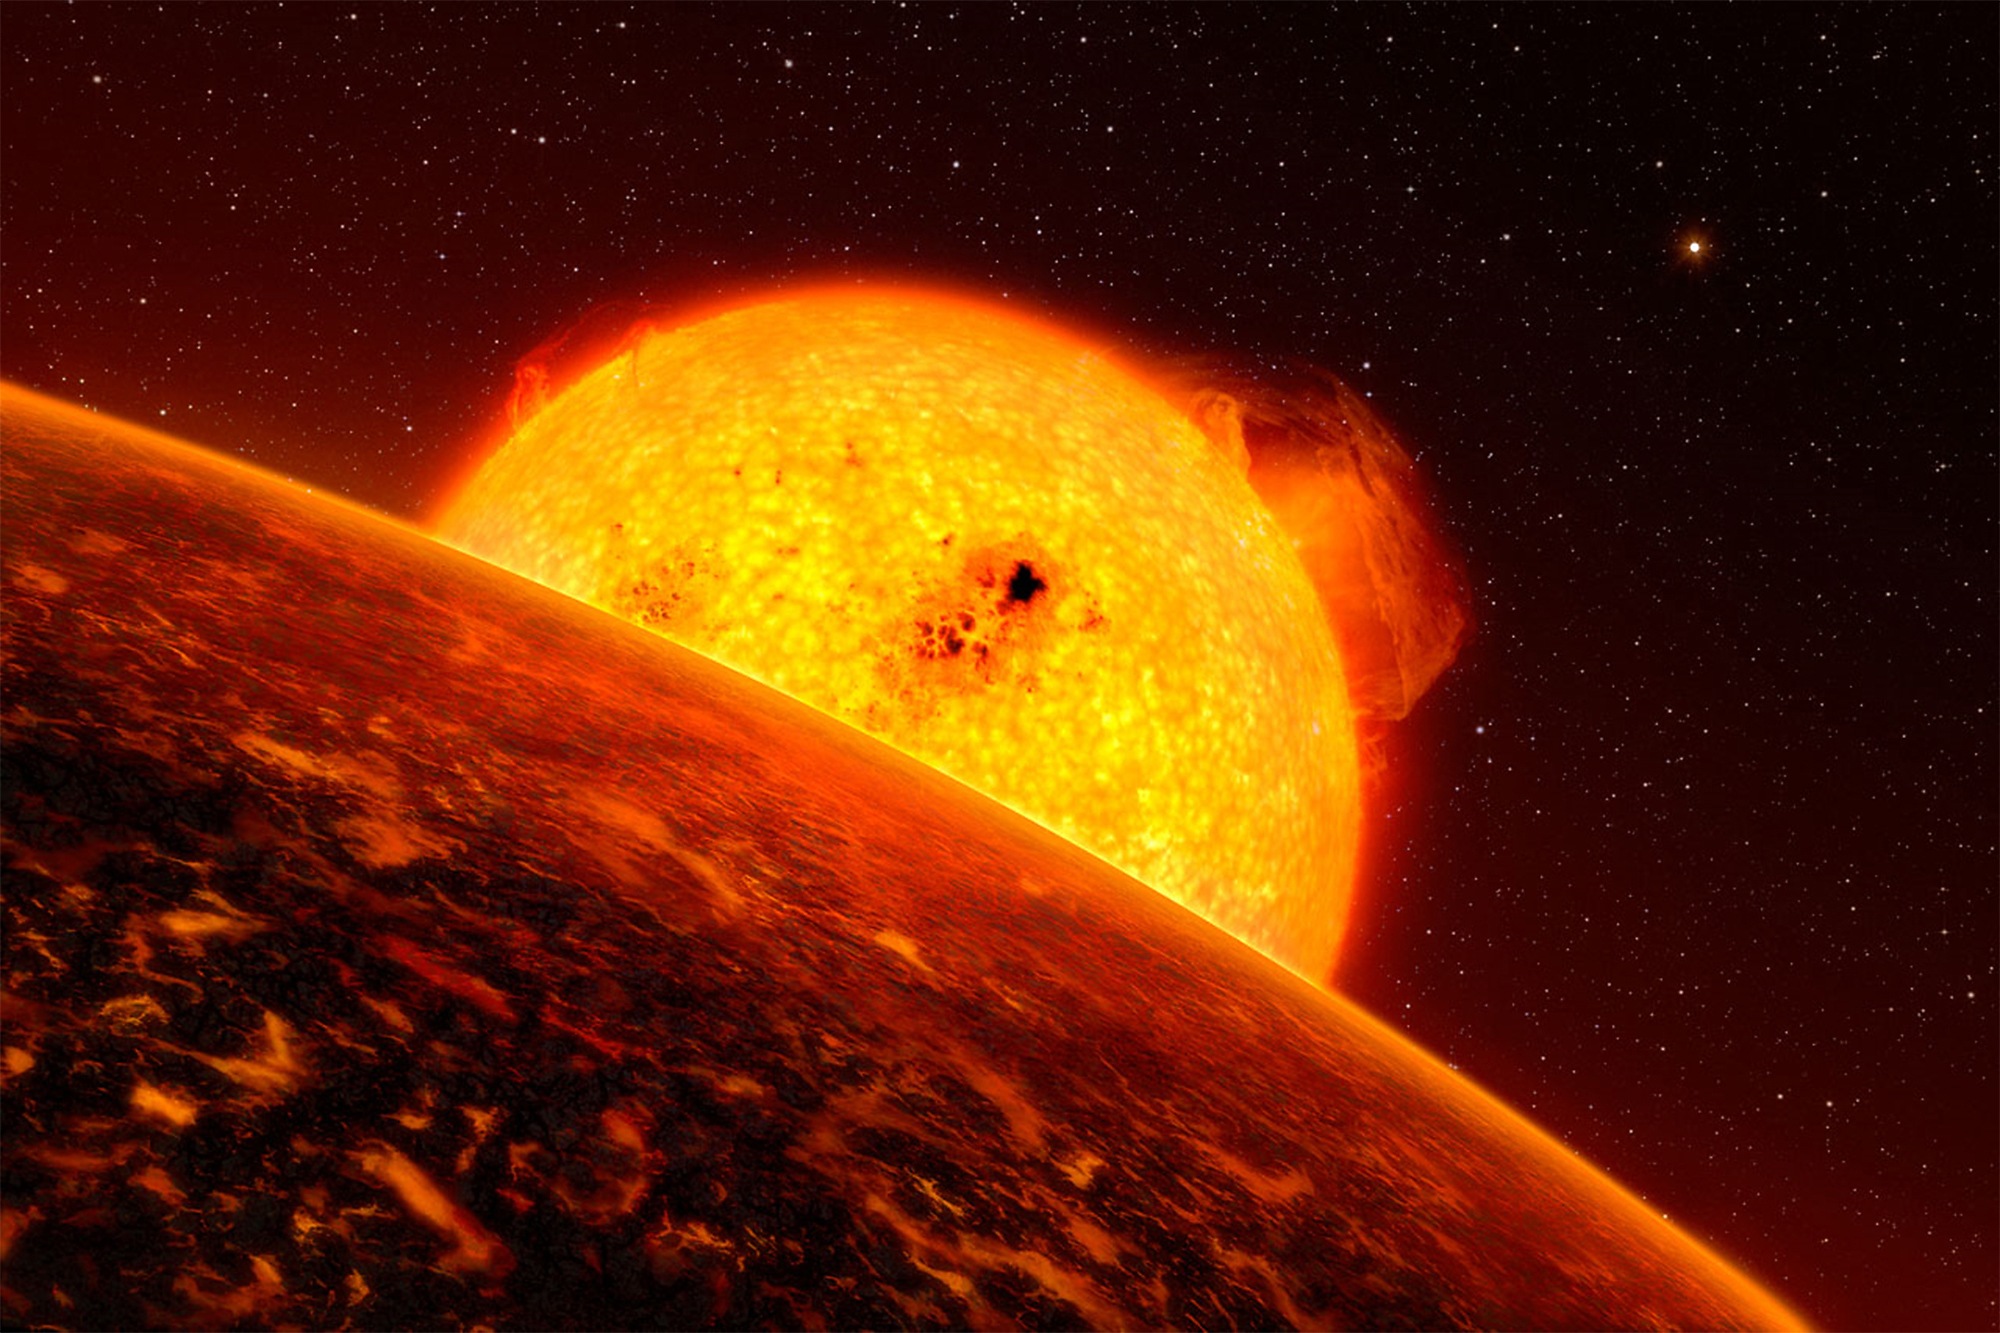 Artist impression of a sun glowing orange with some flares coming off it rising over exoplanet CoRoT-7b, which is almost black with dark red swirls on it.